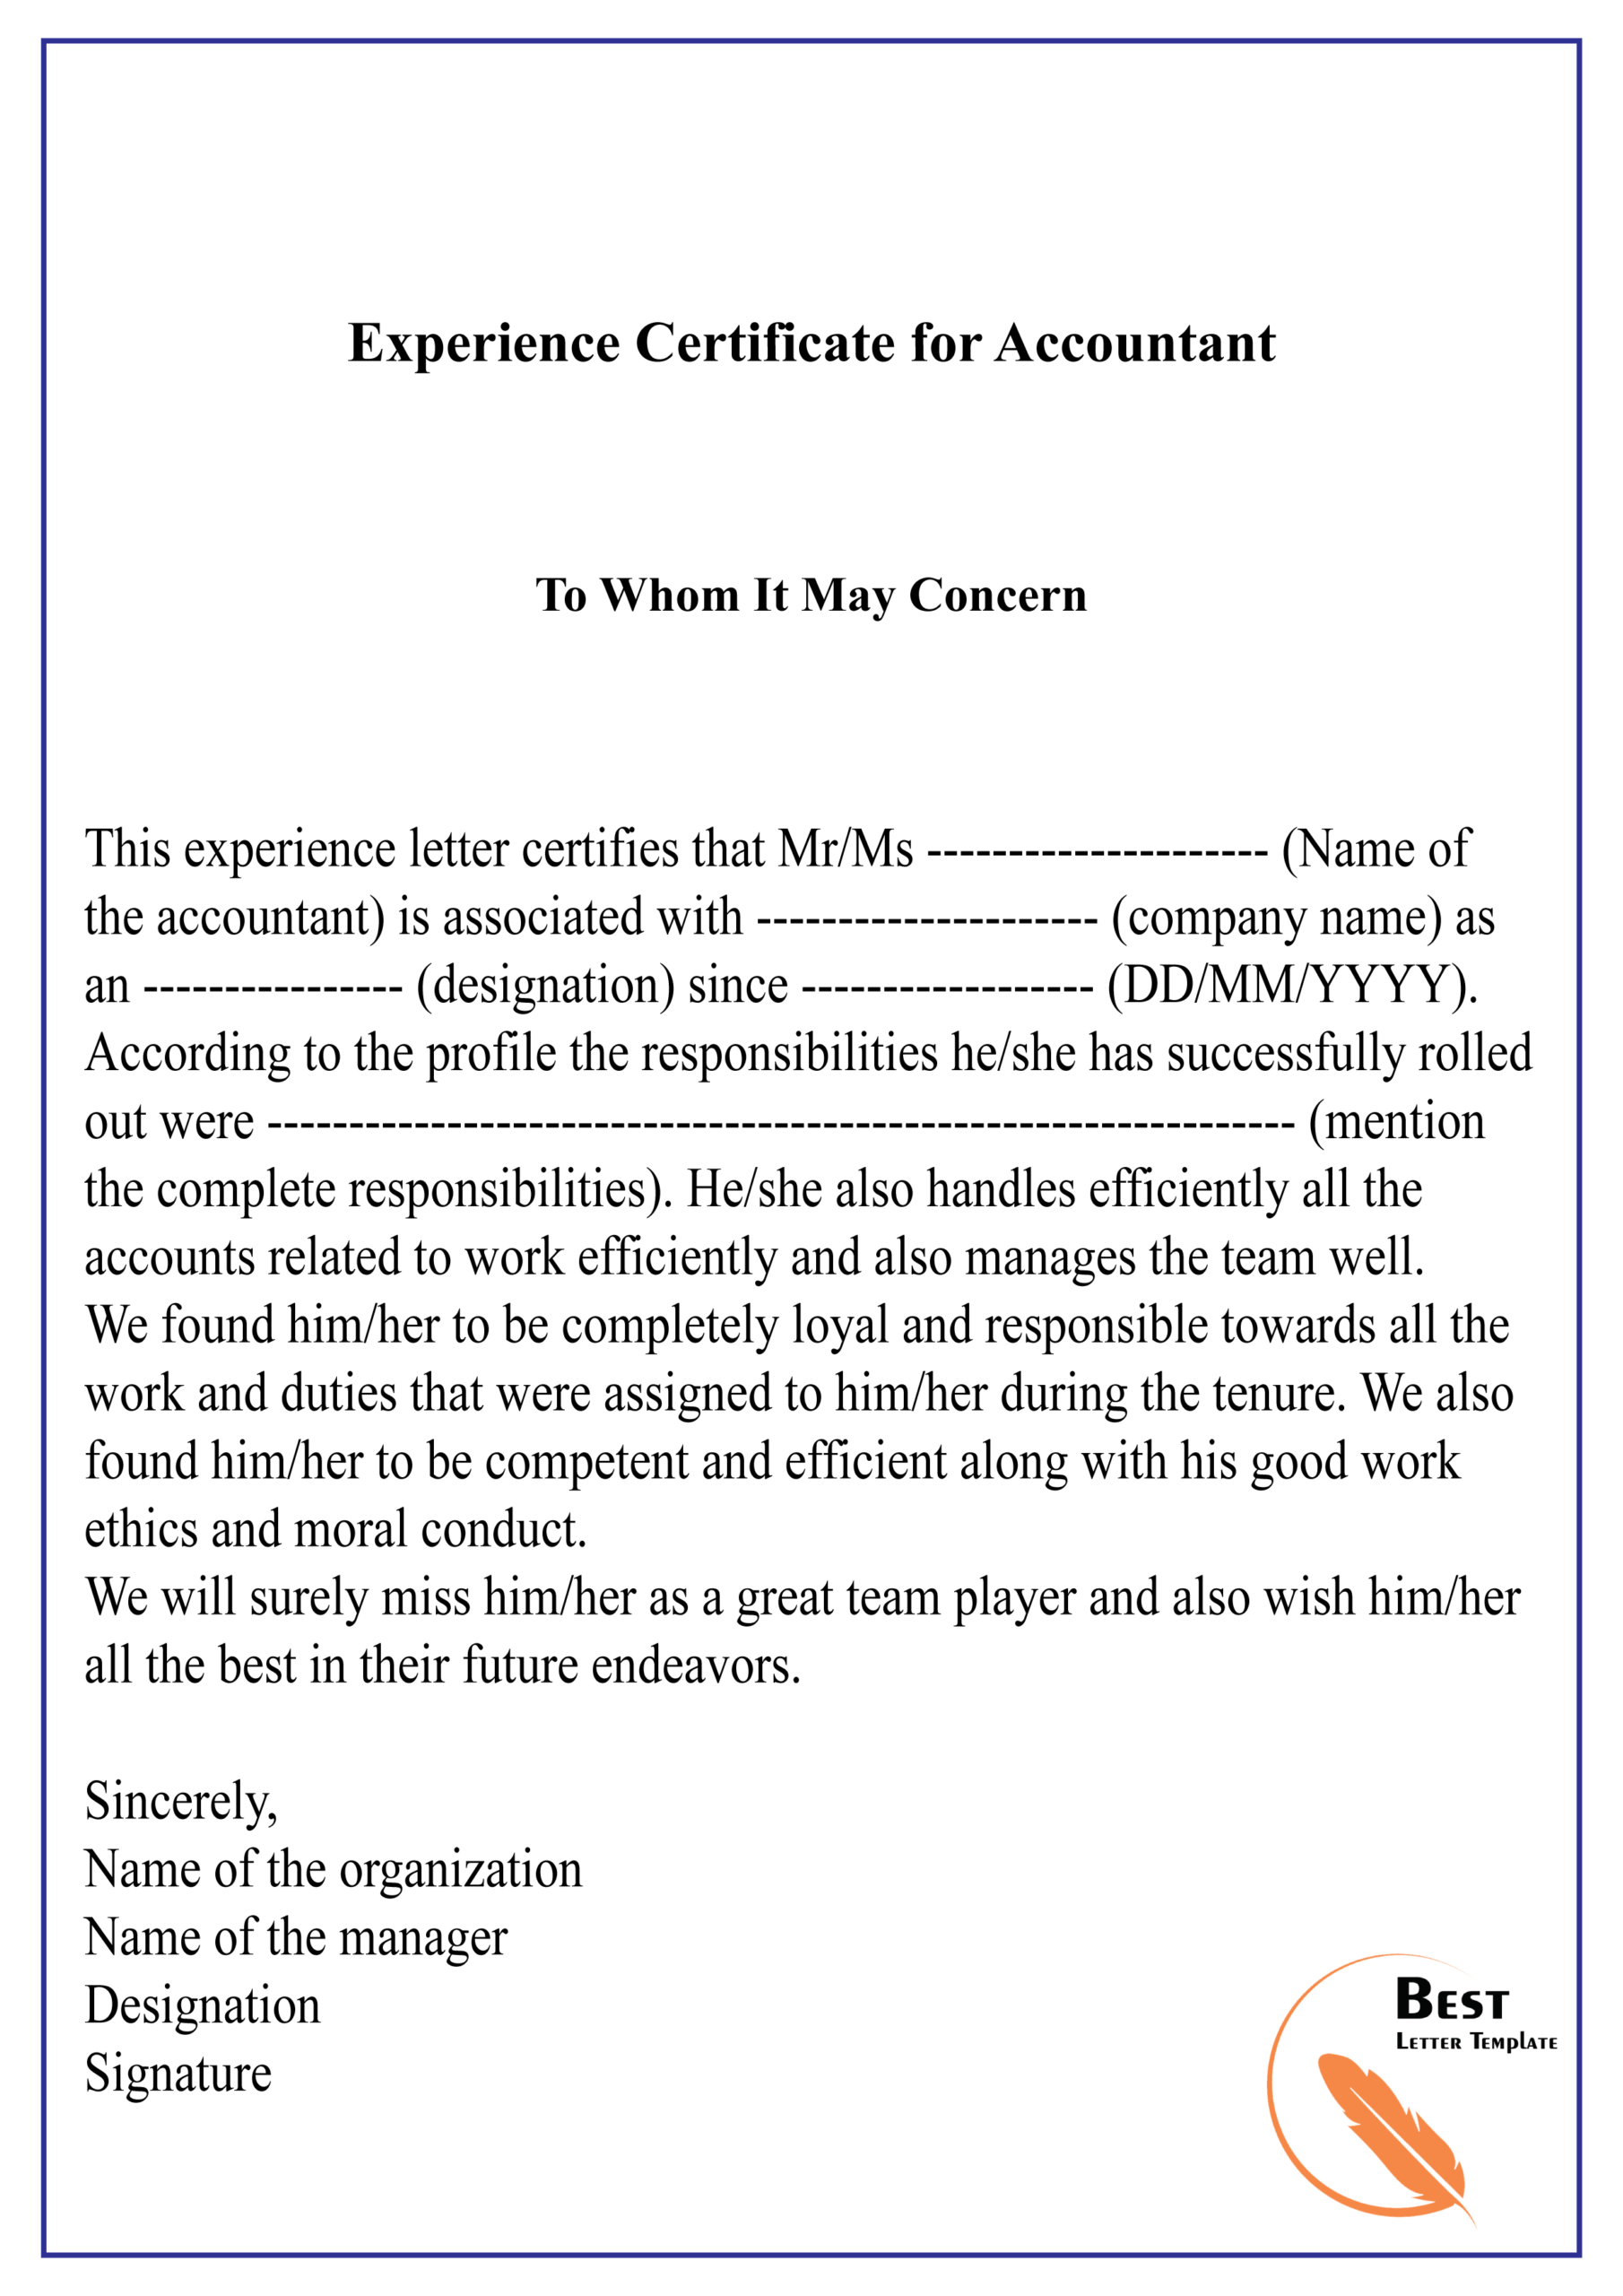 Experience Certificate For Accountant 01 | Best Letter Template With Certificate Of Experience Template